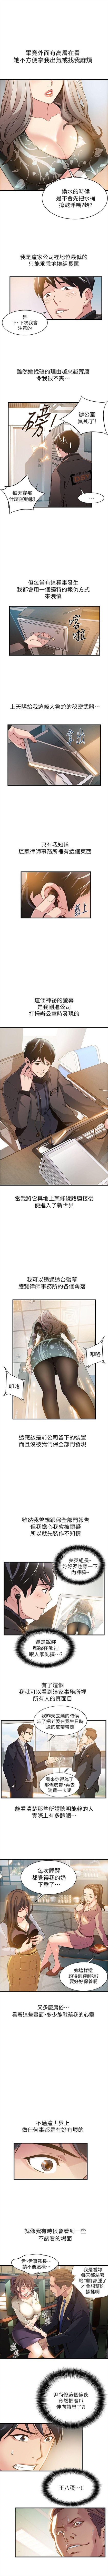 Pissing 弱點 1-94 官方中文（連載中） Female - Page 6